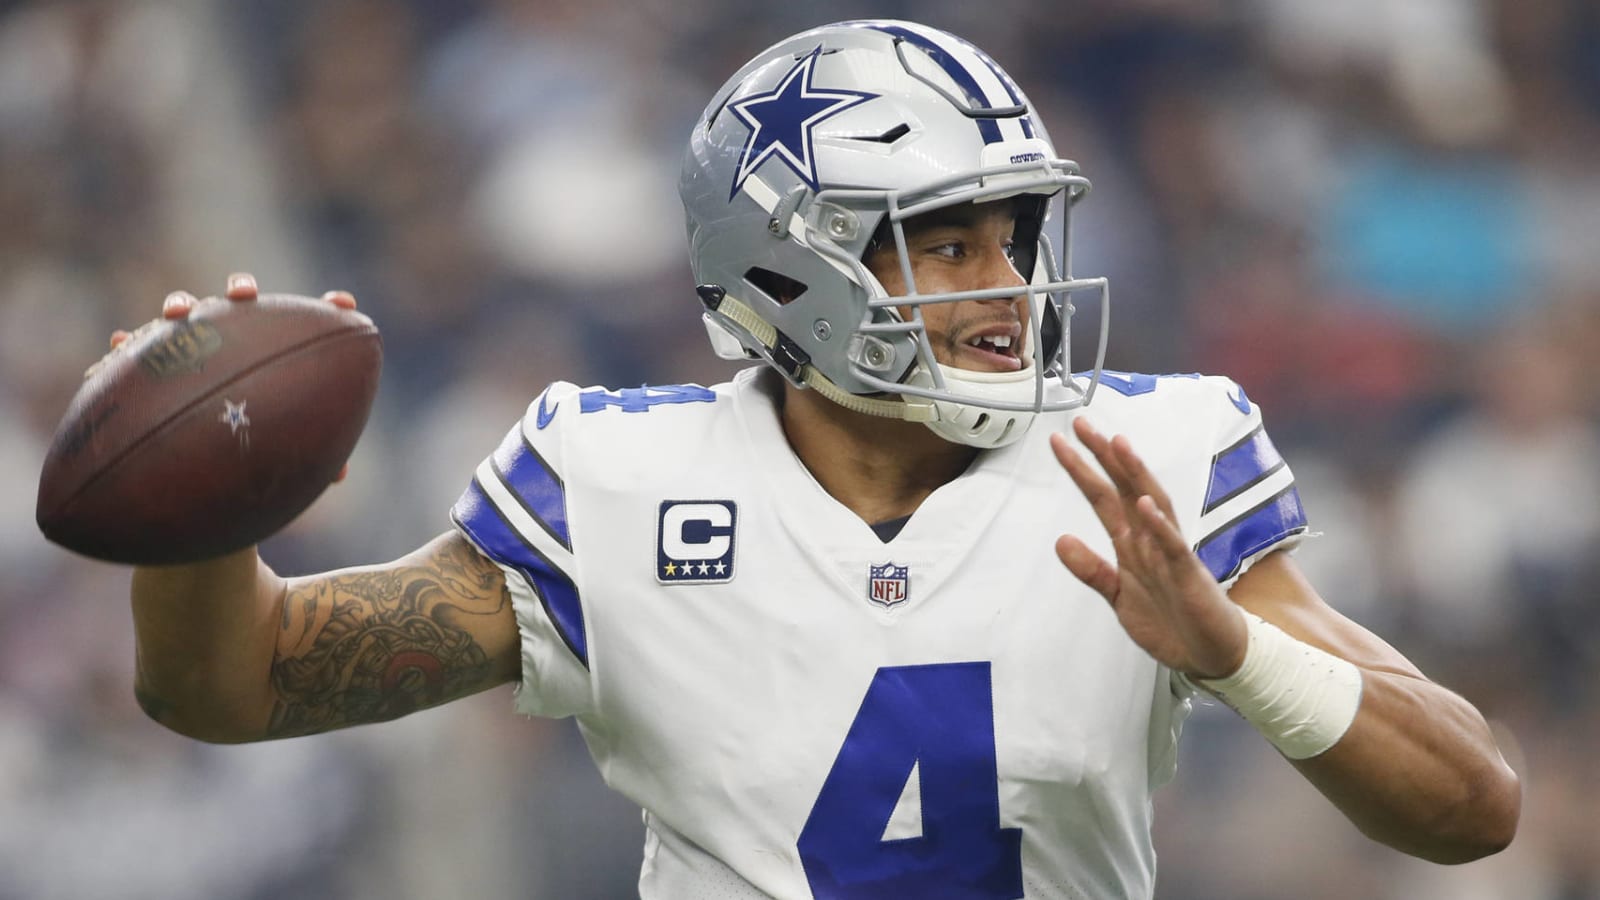 Is Dak Prescott worth it? Here are key numbers to size up Cowboys QB